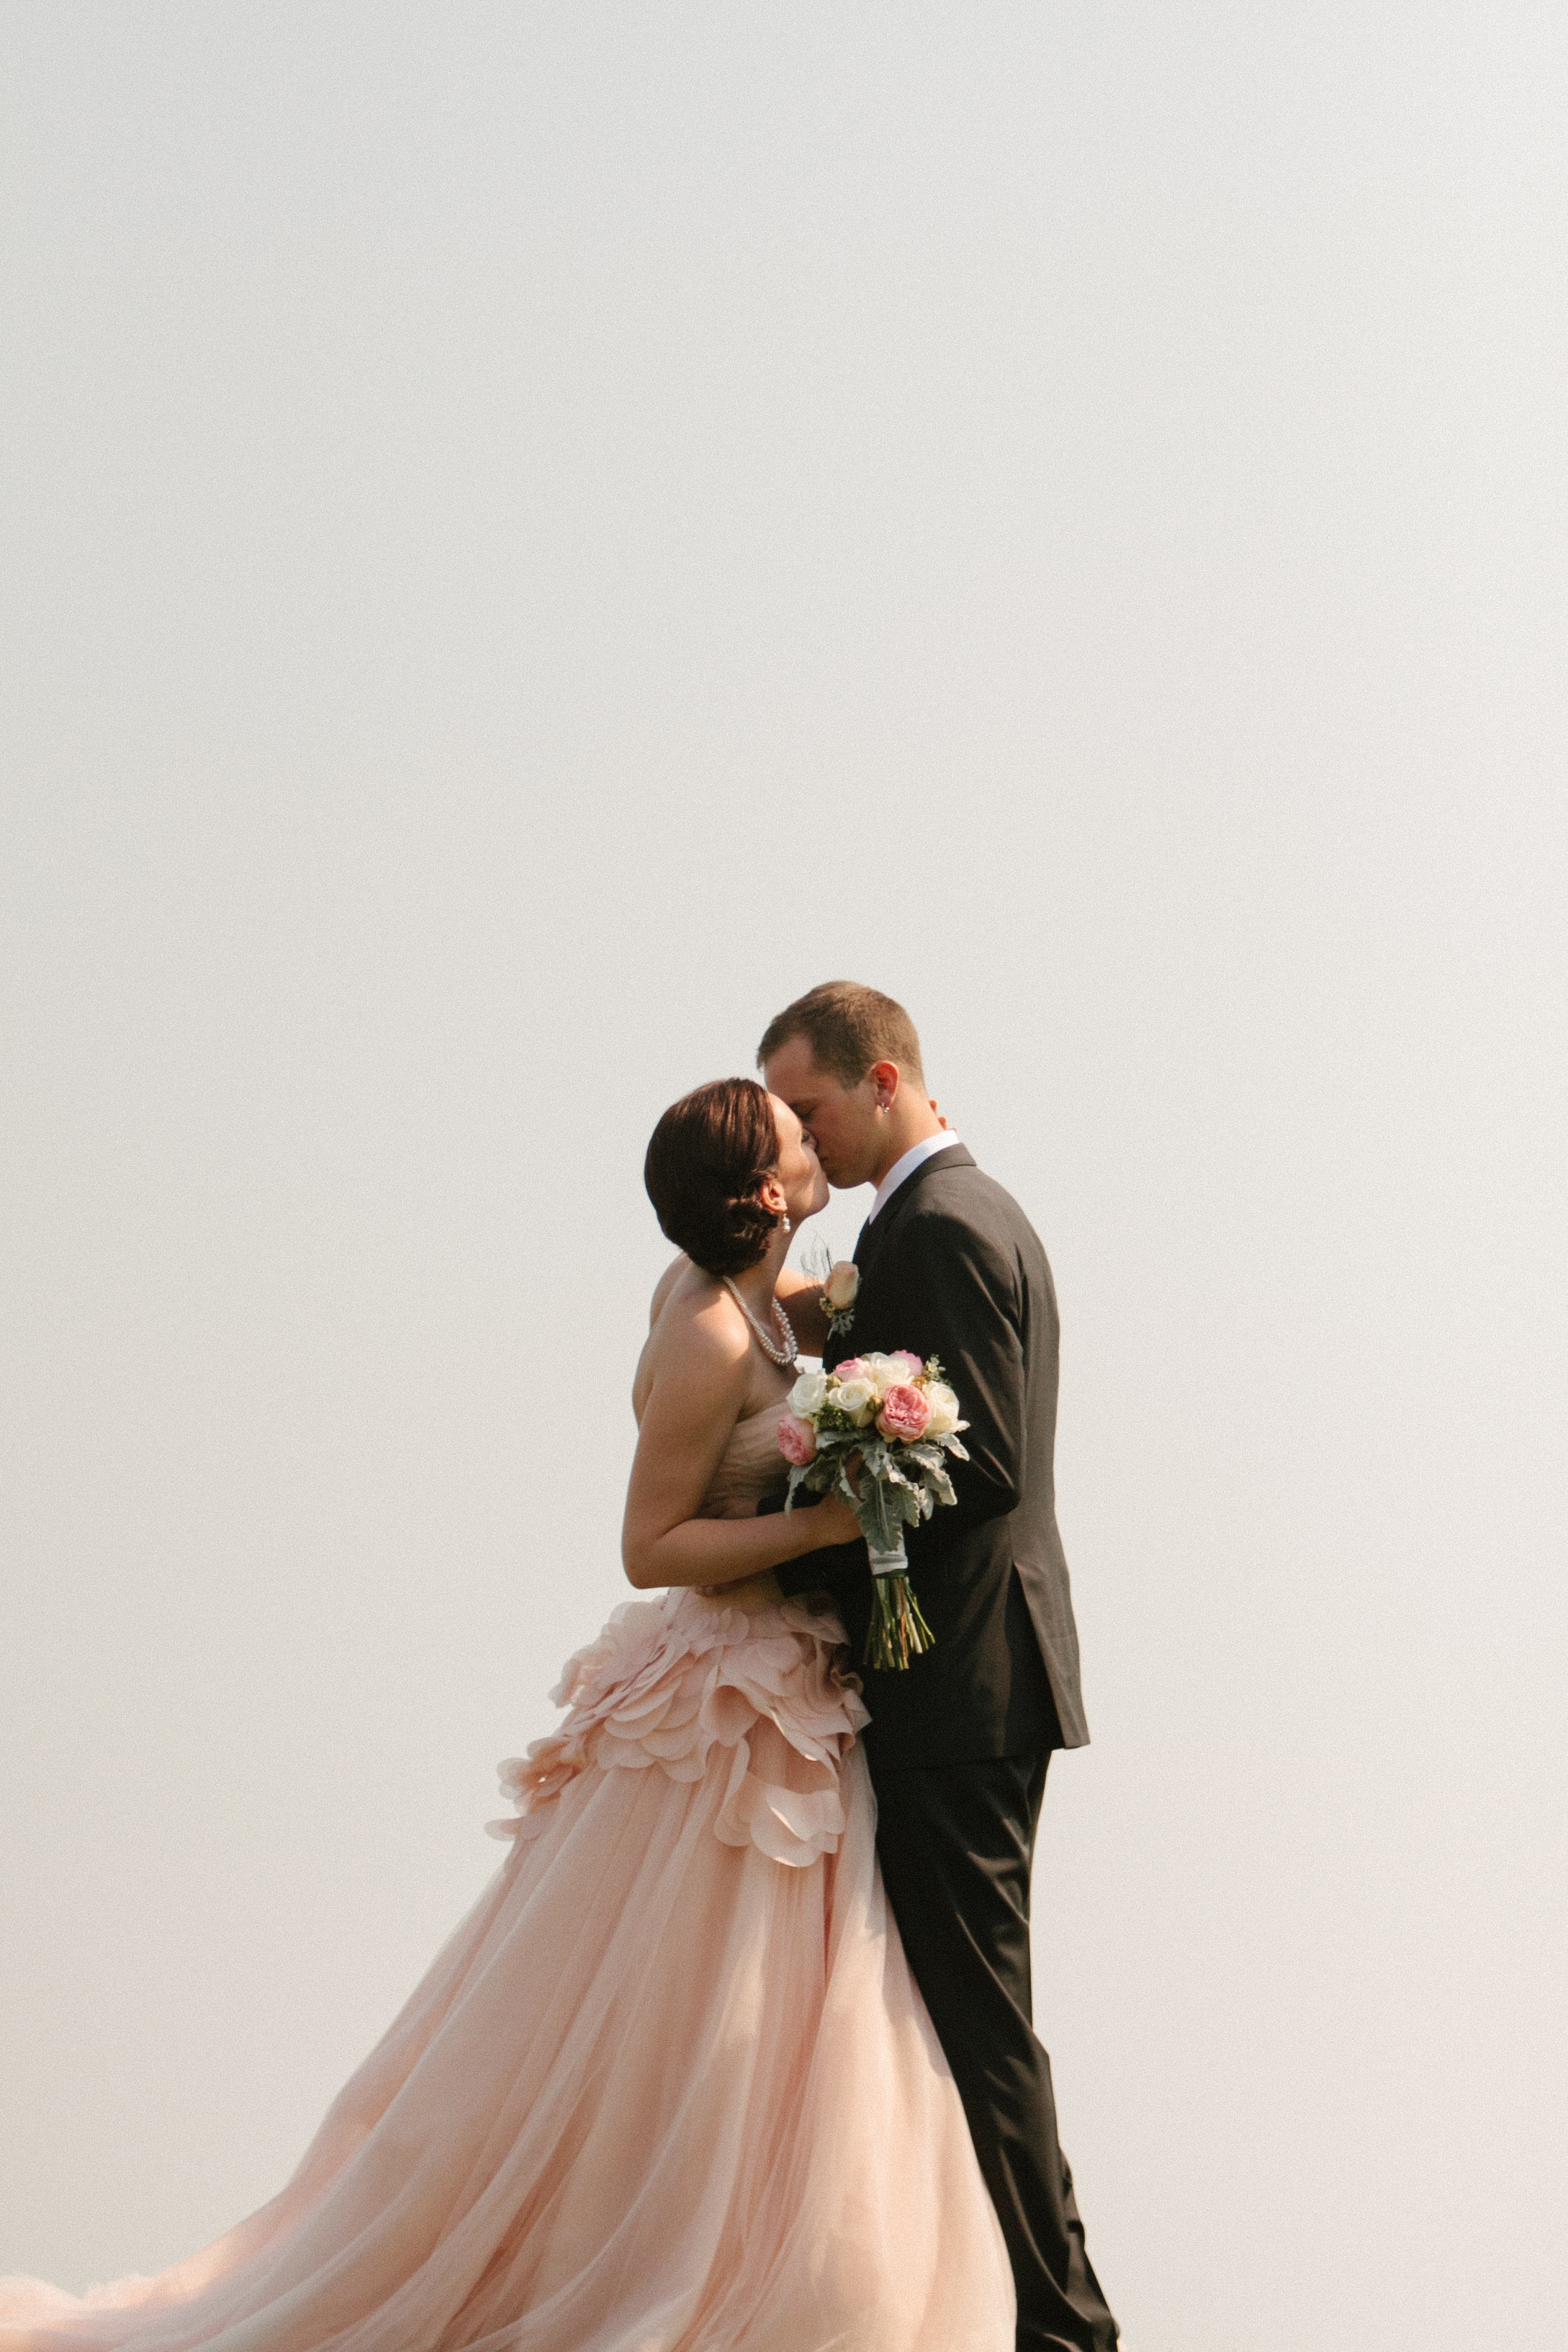  Stunning Photo of the Bride and Groom Kissing | Wedding Gown by Vera Wang | photo by blf Studios | wedding by Madeline's Weddings 